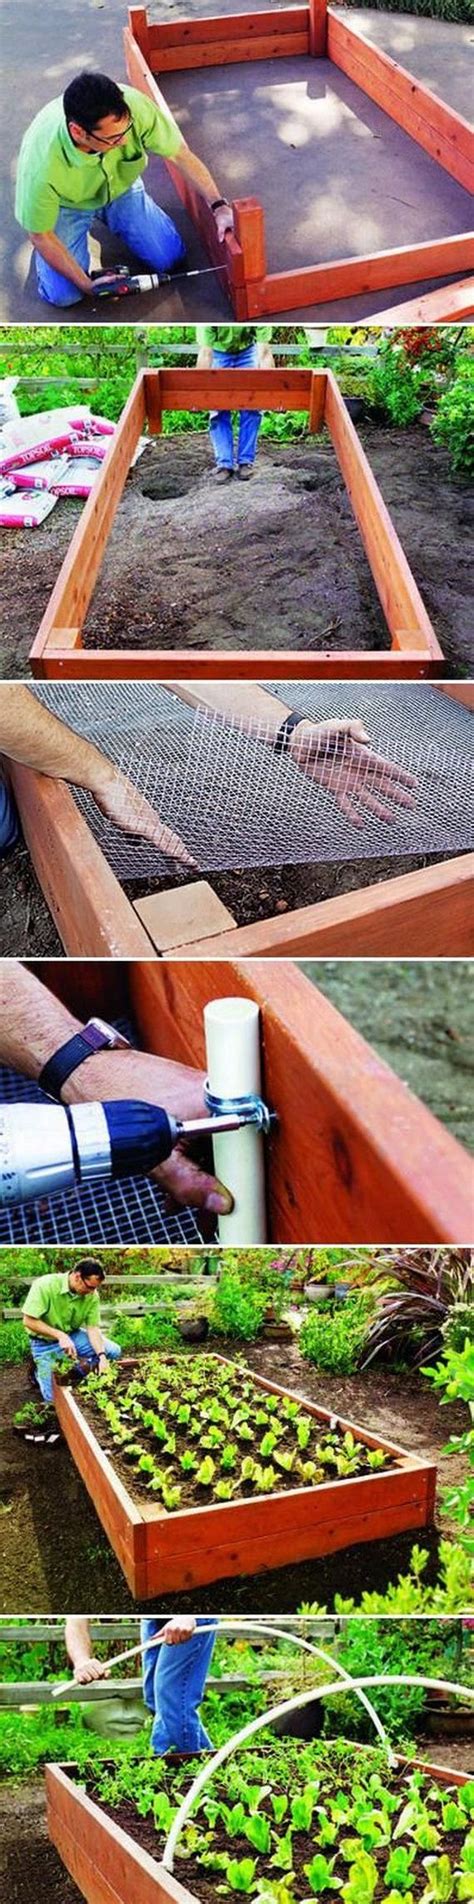 Texas gardeners are discovering that raised bed gardens can help solve many problems. Cool DIY Raised Garden Bed Ideas